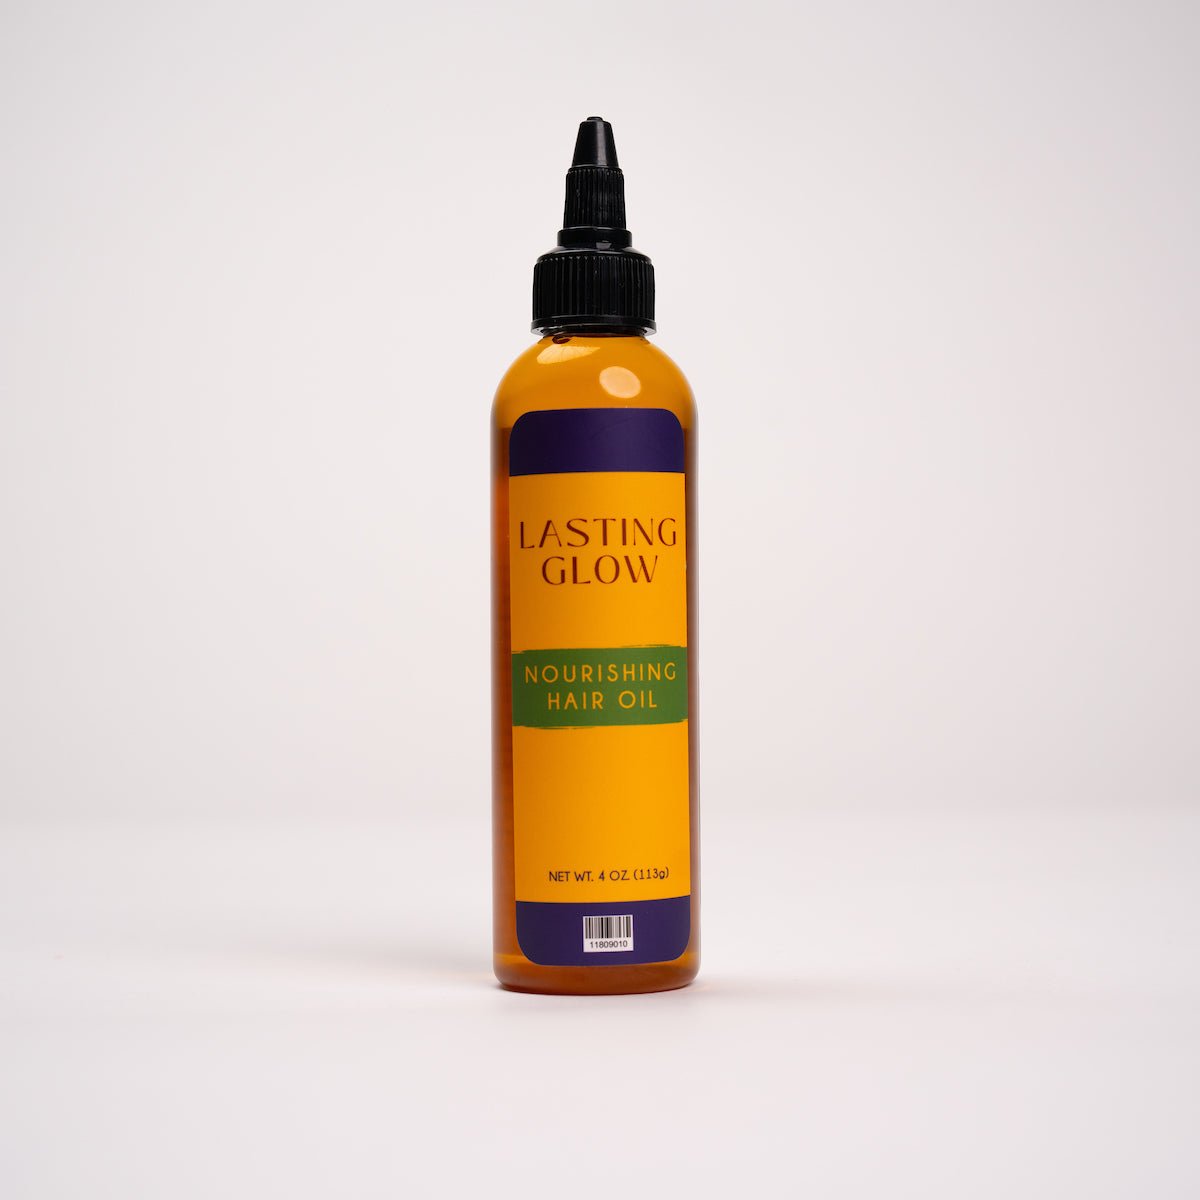 Lasting Glow Hair Oil - Kentucky Soaps & Such